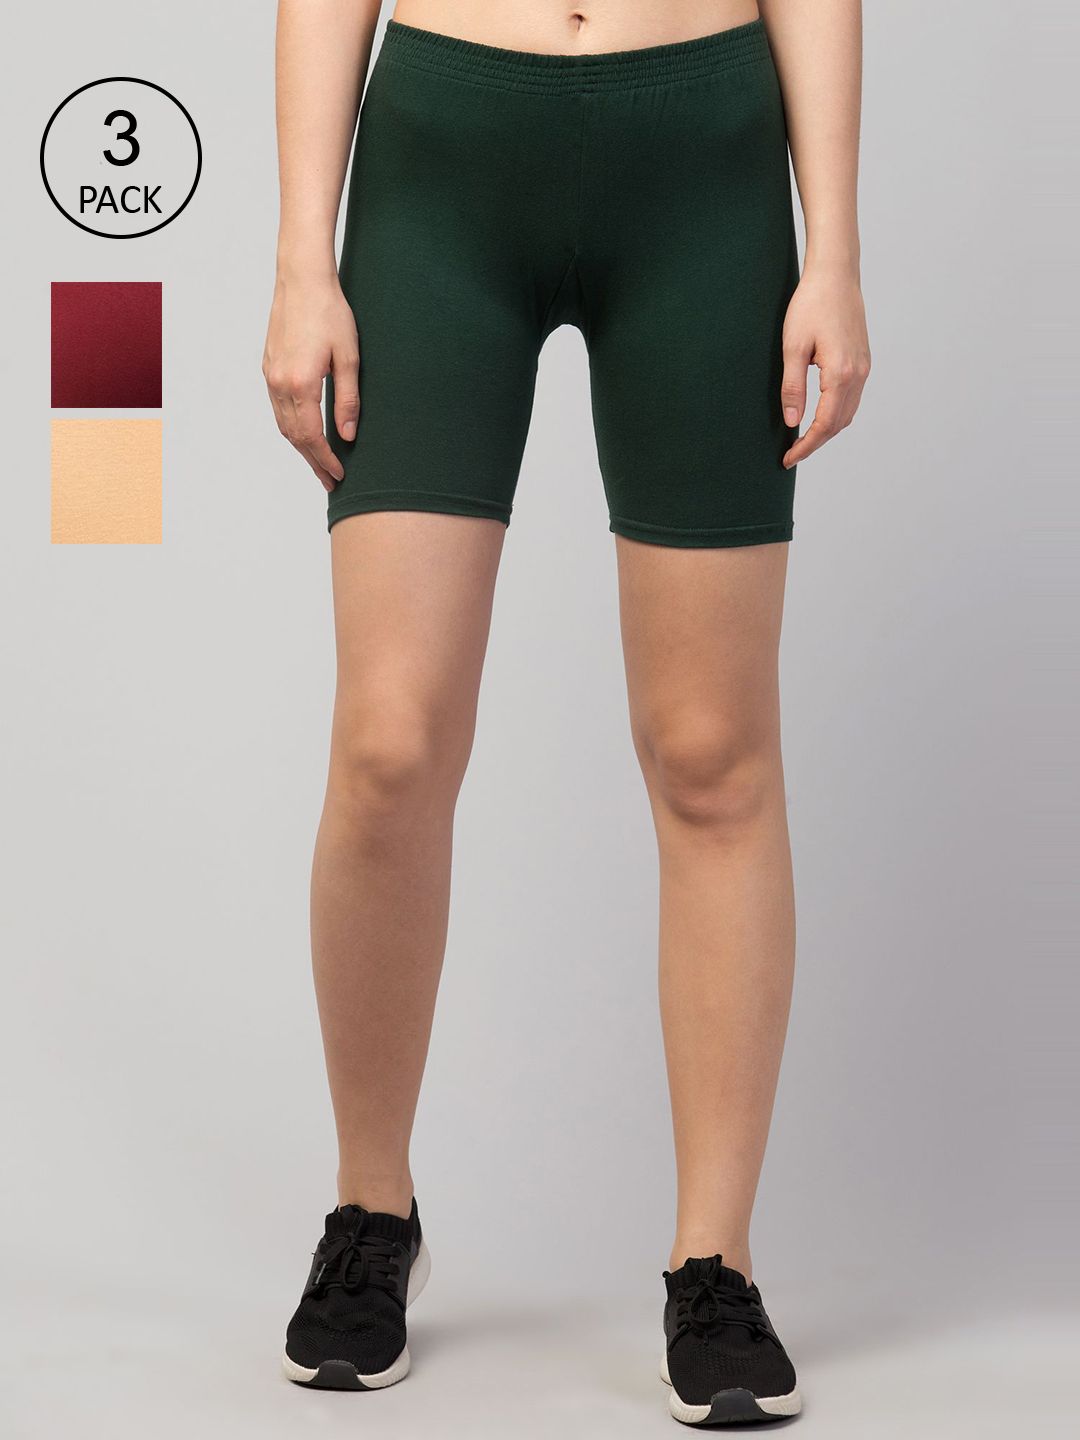 Apraa & Parma Women Green & Maroon Set Of 3 Slim Fit Cycling Sports Shorts Price in India